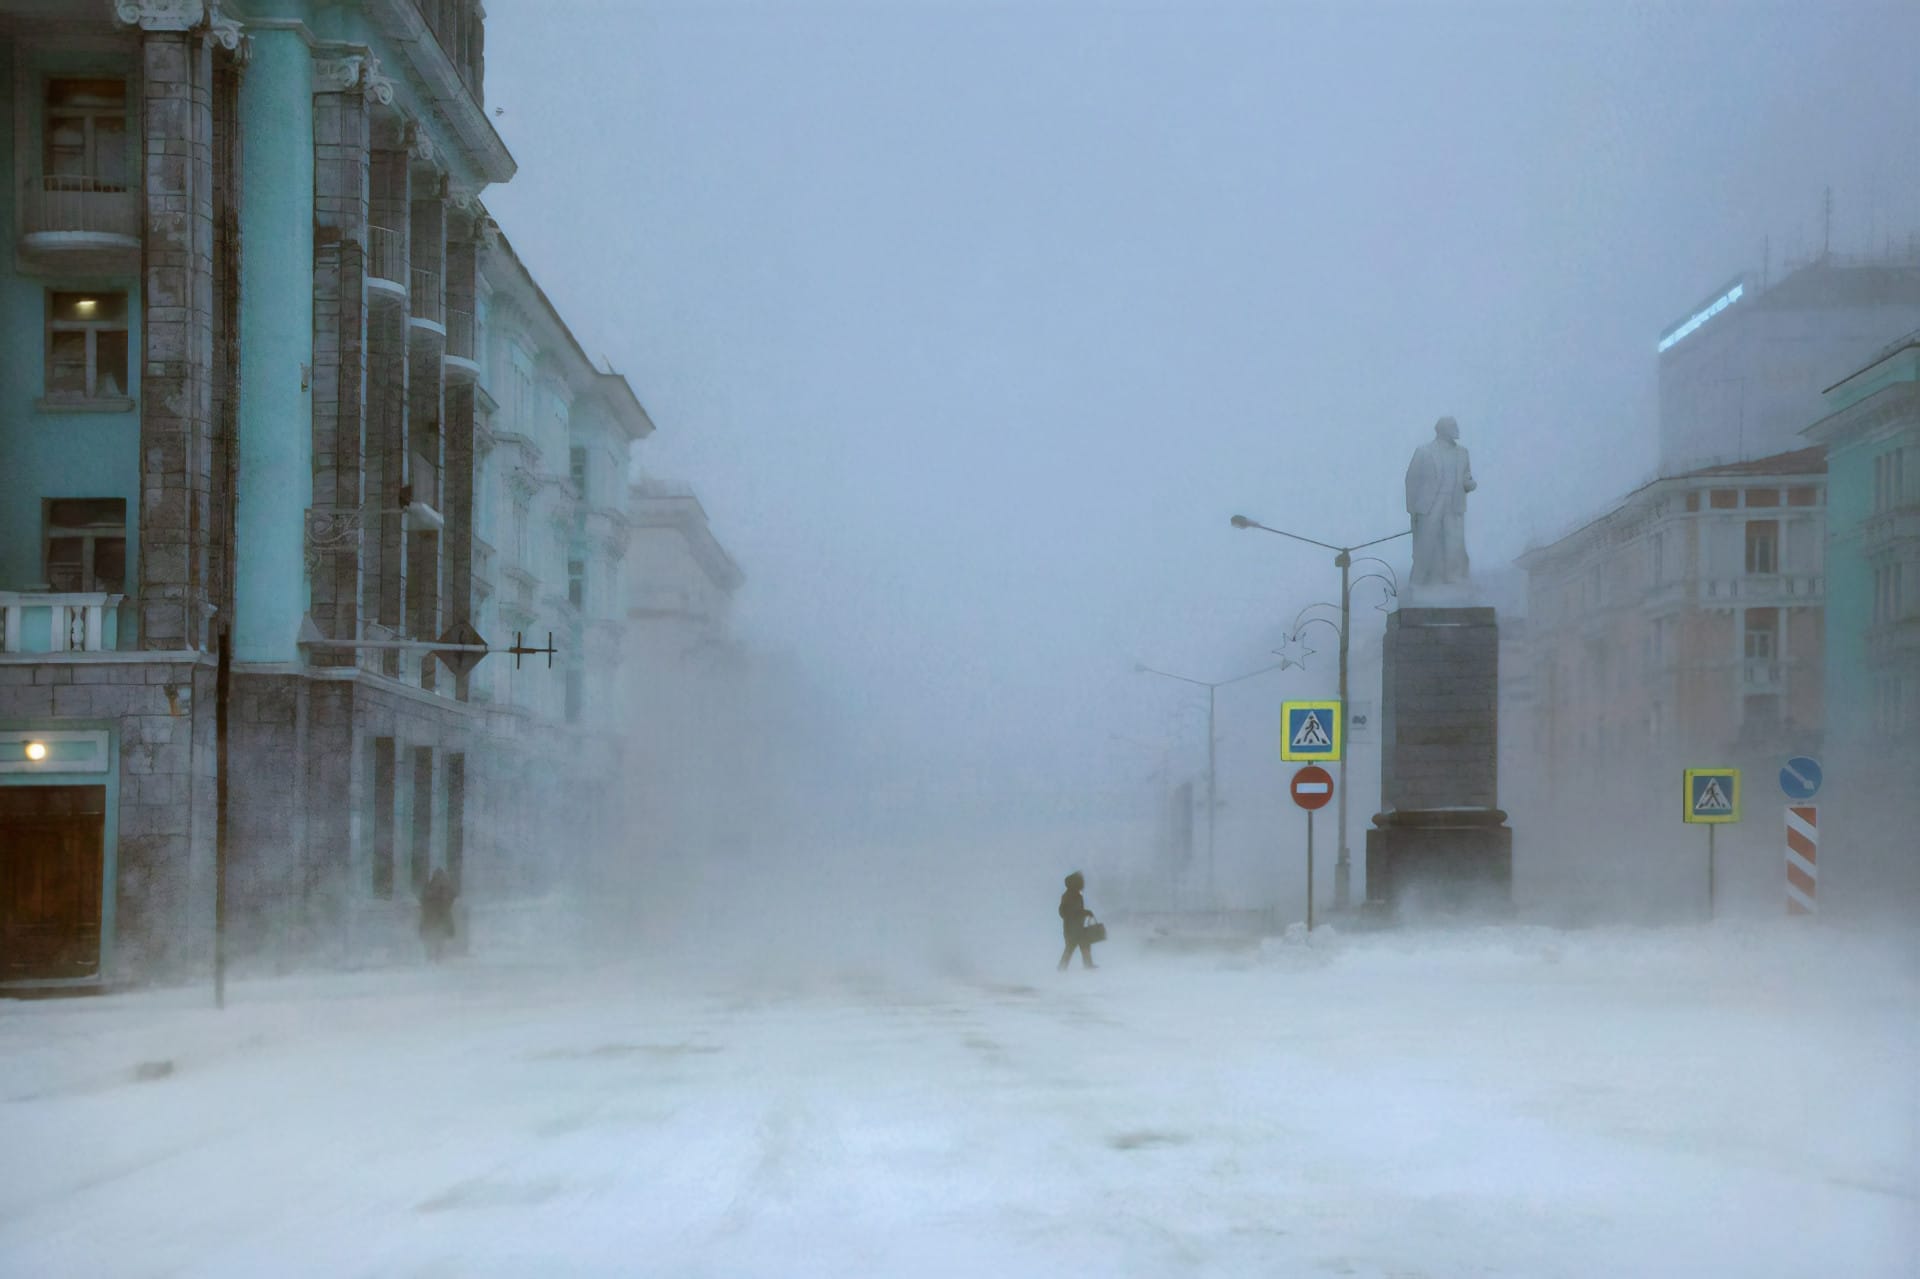 Christophe Jacrot in Norilsk, Russia’s most polluted city – Public Delivery